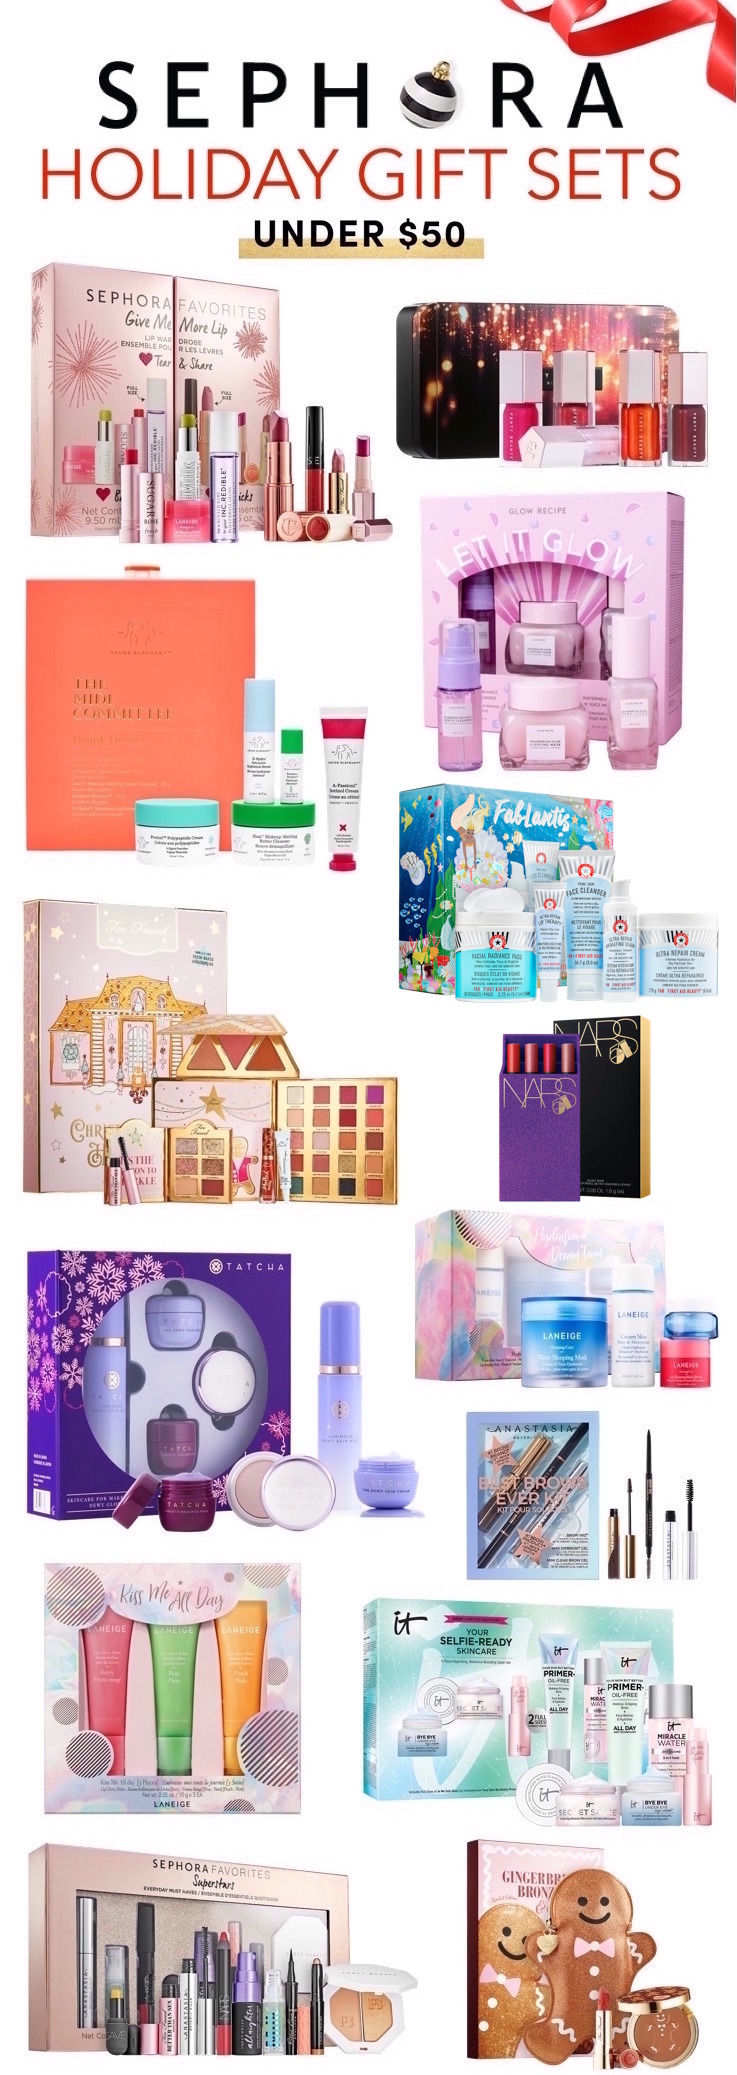 The Best Sephora Holiday 2019 Sets Under $50! Click through to see the full list #sephoragiftsets #holidaygiftideas #beautygifts #holidays2019 #makeupgifts #holidaygift 